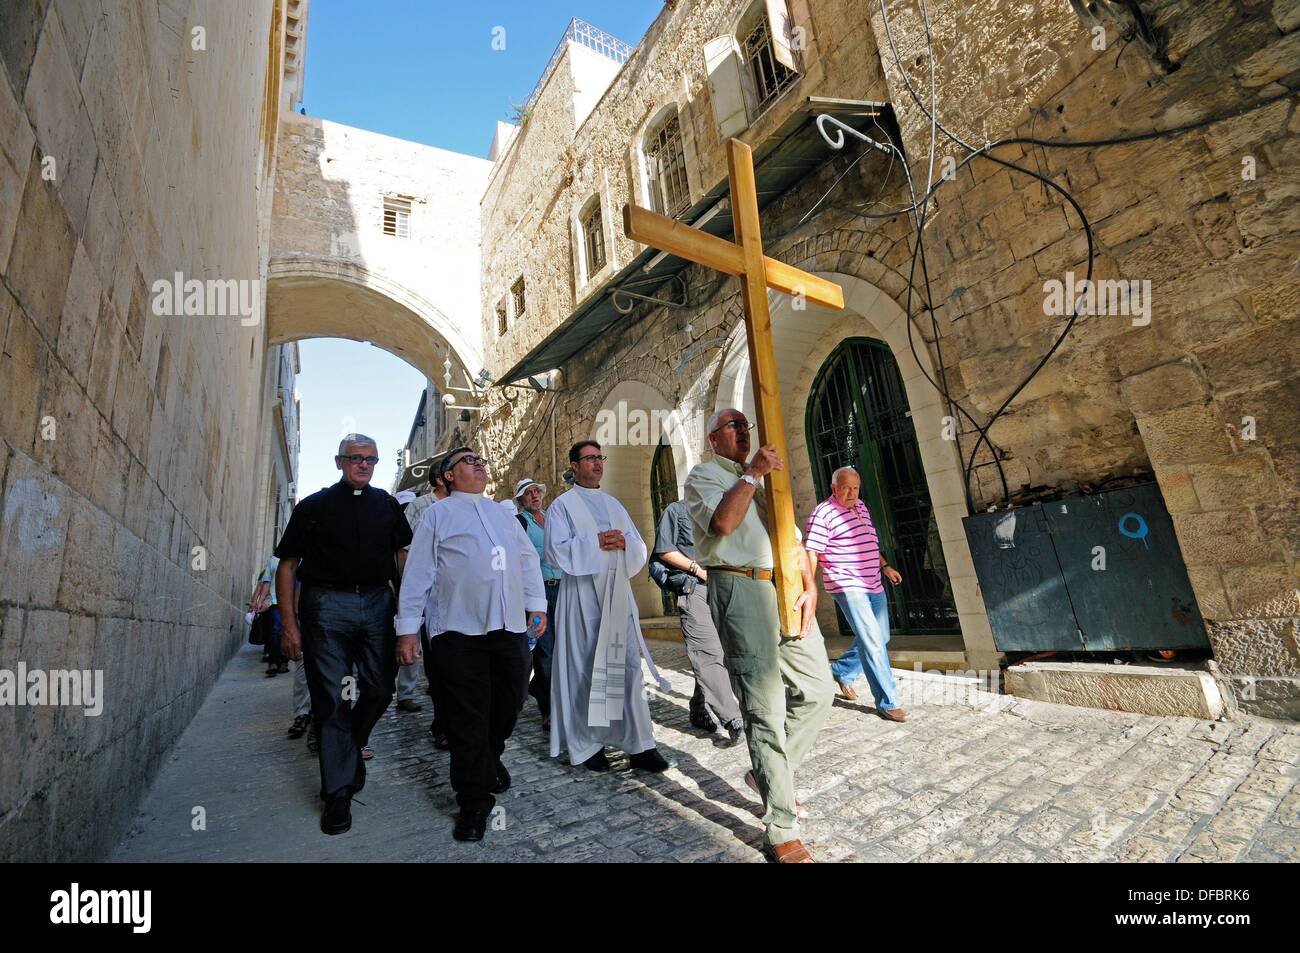 View of a procession of Christian pilgrims on the Via Dolorosa in Jerusalem, Israel, 12 September 2013. The Via Dolorosa (Way of Suffering) is a street in the old town of Jerusalem named after the path Jesus of Nazareth walked to his crucification. Jesus carried the cross, on which he later died via that road from the Antonia Fortress, then seat of Pilate, to Golgotha, the place where his grave is supposedly located. Above this place, the Church of the Holy Sepulchre was later built. The path led Jesus via 14 stations that are often visited by modern pilgrims walking through the old town. Phot Stock Photo